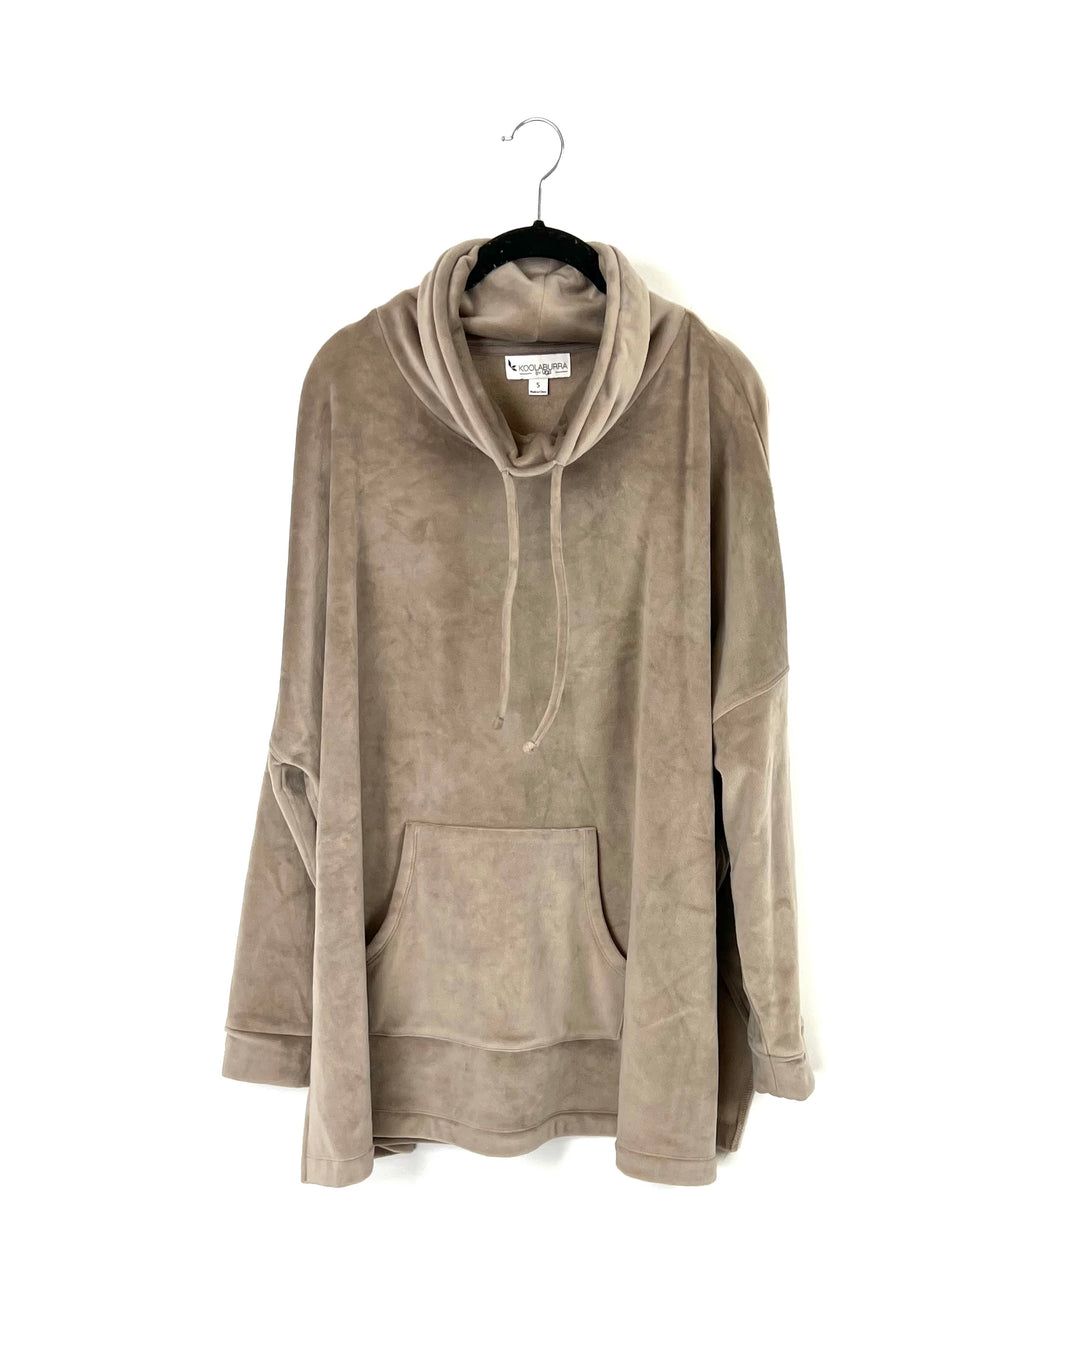 Taupe Fleece Pullover - Small